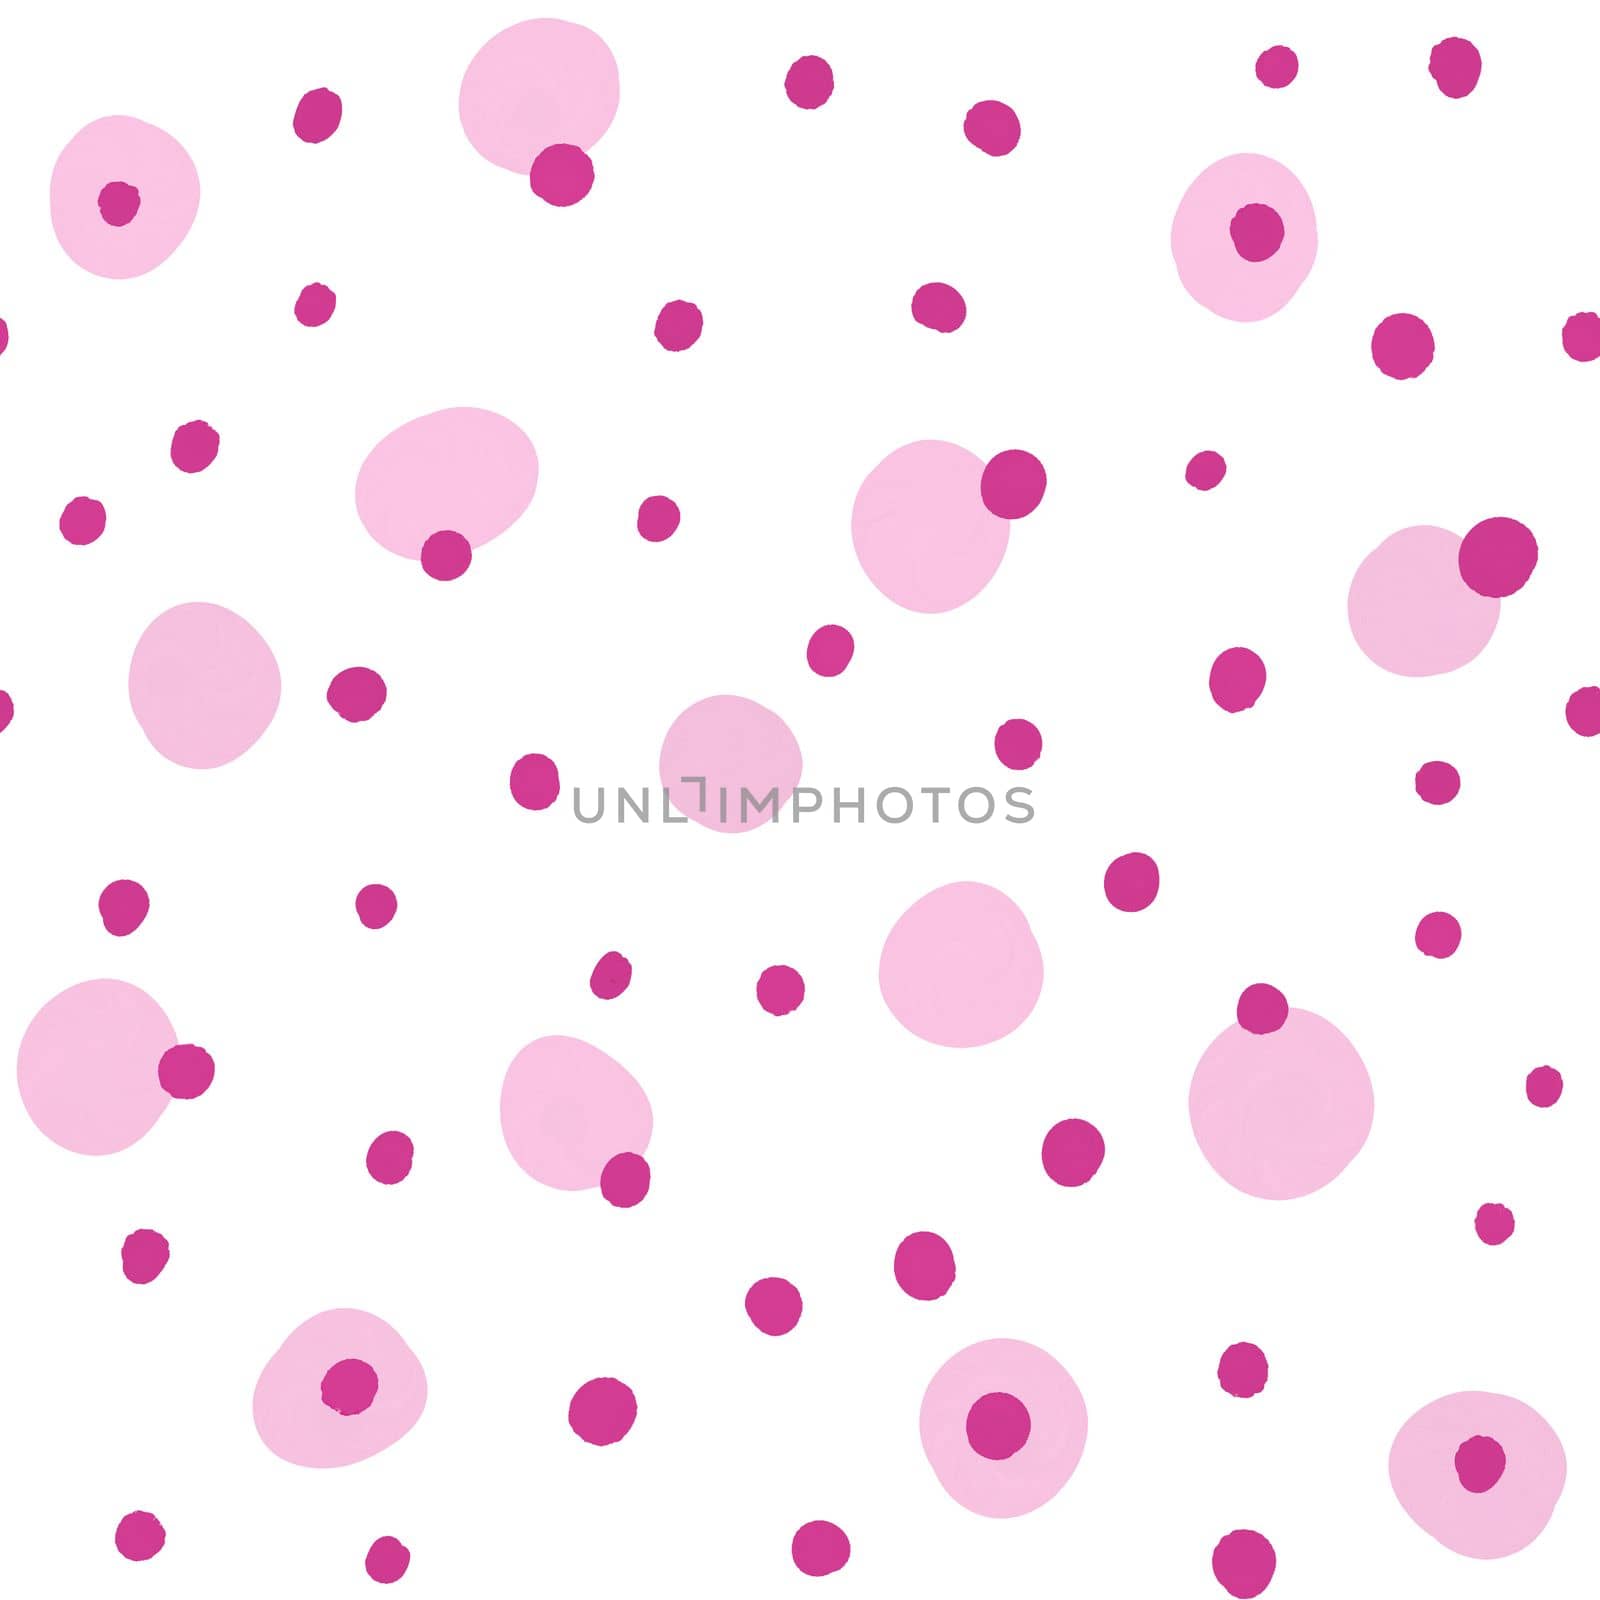 Hand drawn seamless pattern with pink red polka dot round circles fabric print. Simple minimalist design for girl nursery kids children apparel, gender reveal print, funny cute blobs on white background